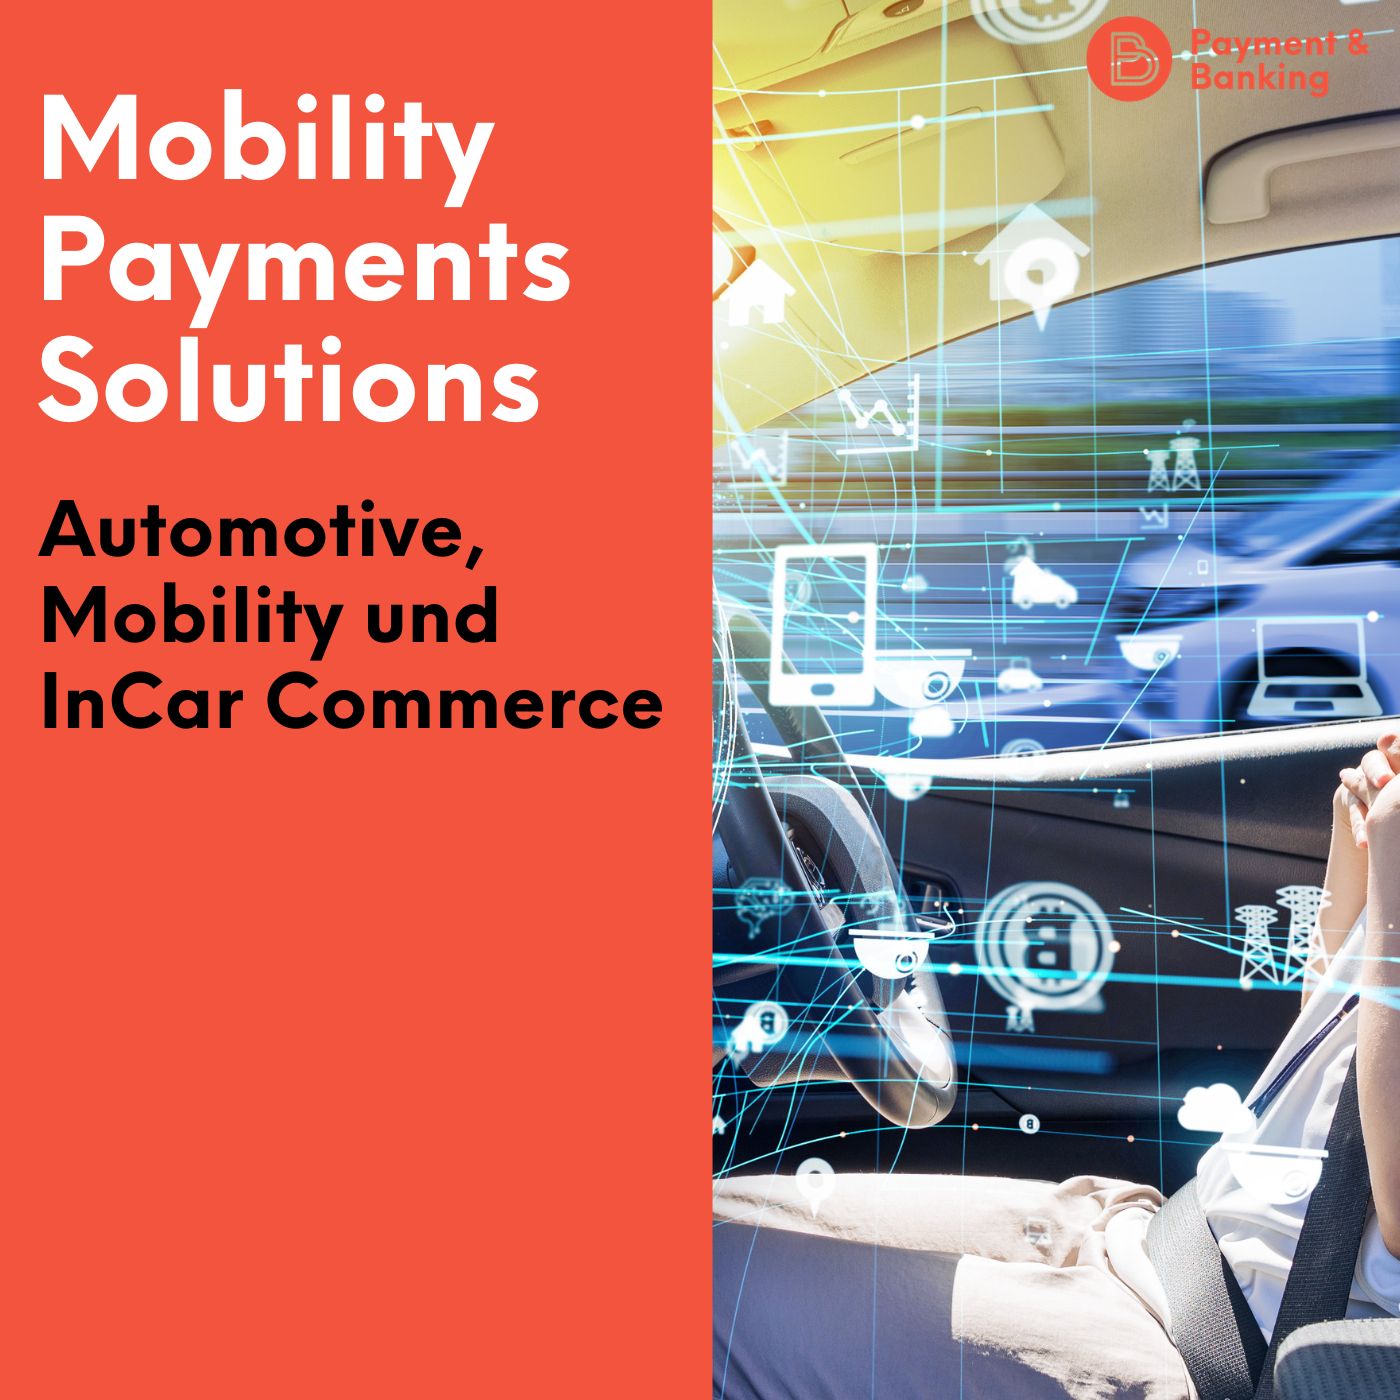 #454: It’s all about Mobility Payments Solutions: Automotive, Mobility und InCar Commerce